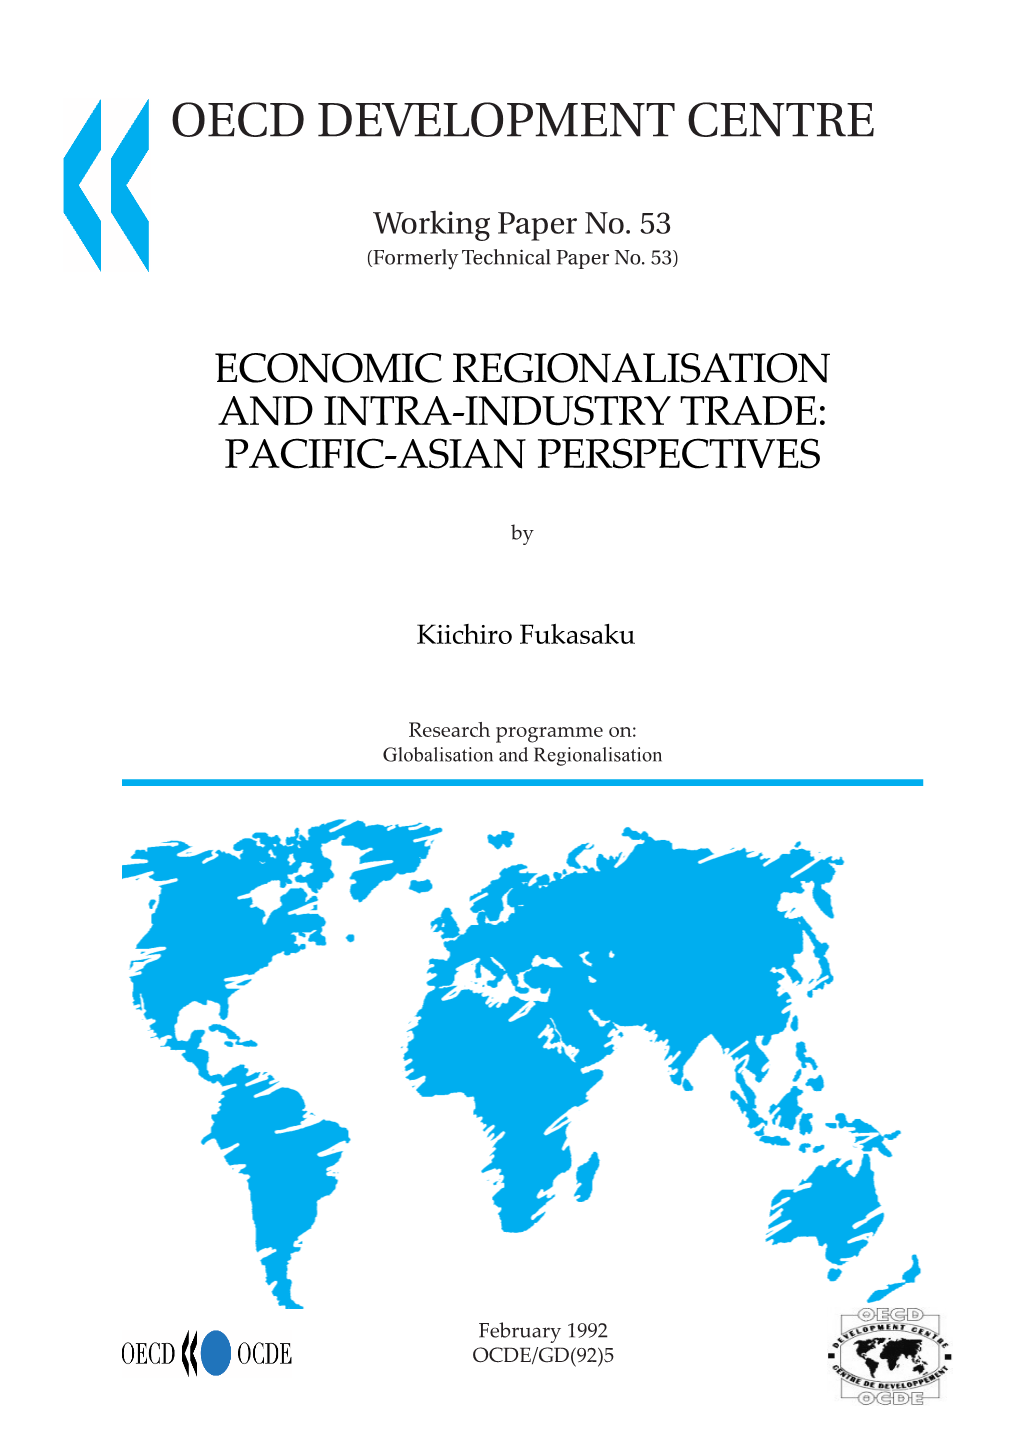 Economic Regionalisation and Intra-Industry Trade: Pacific-Asian Perspectives